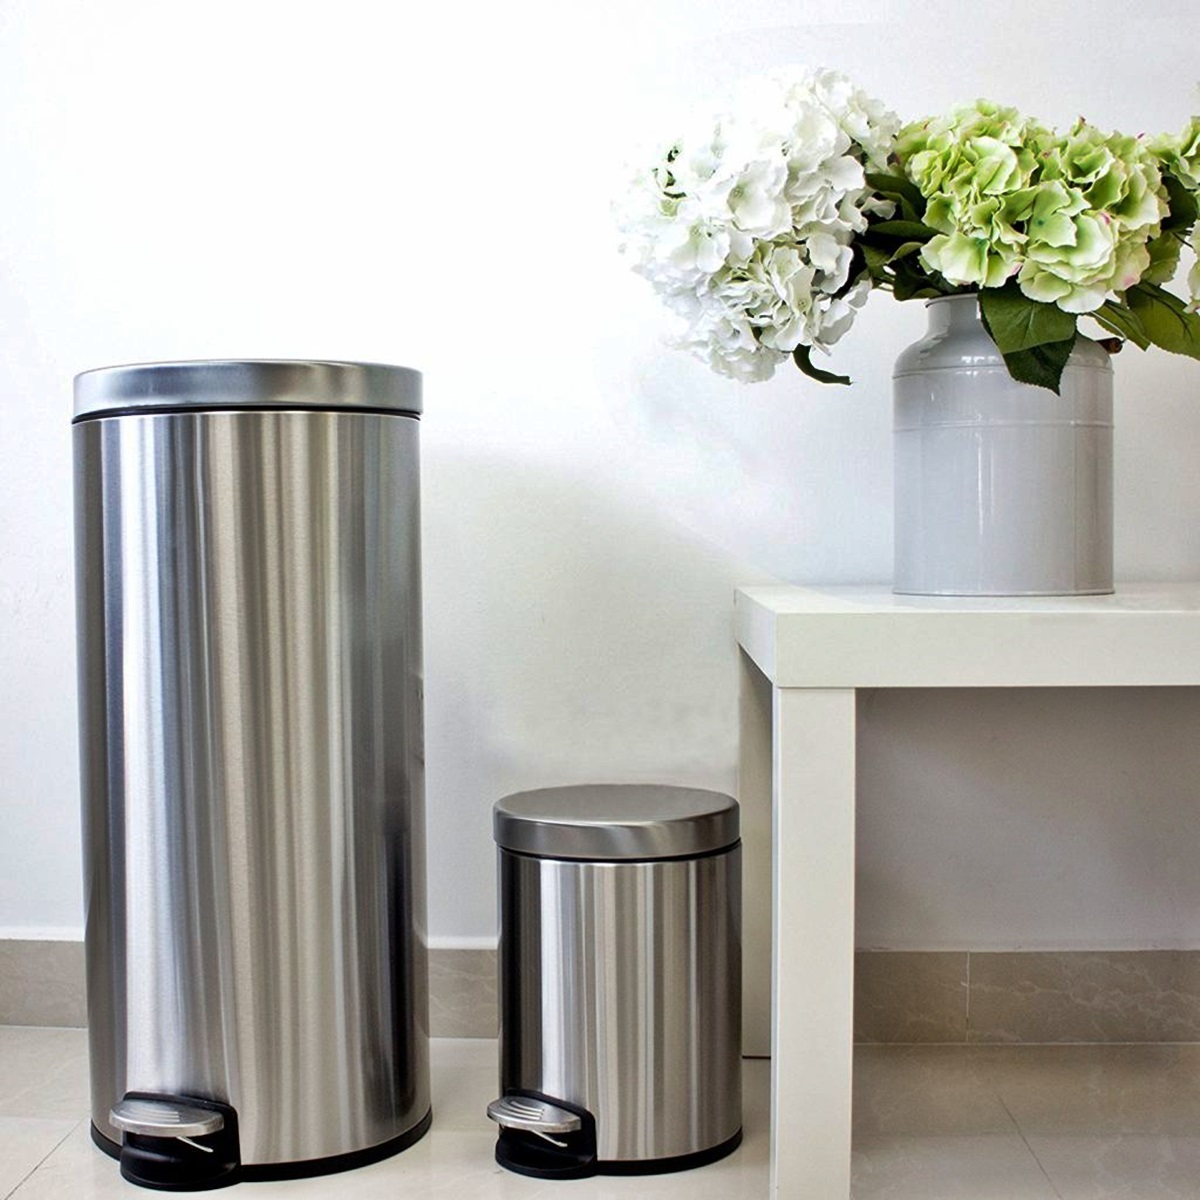 How Big Should A Kitchen Trash Can Be